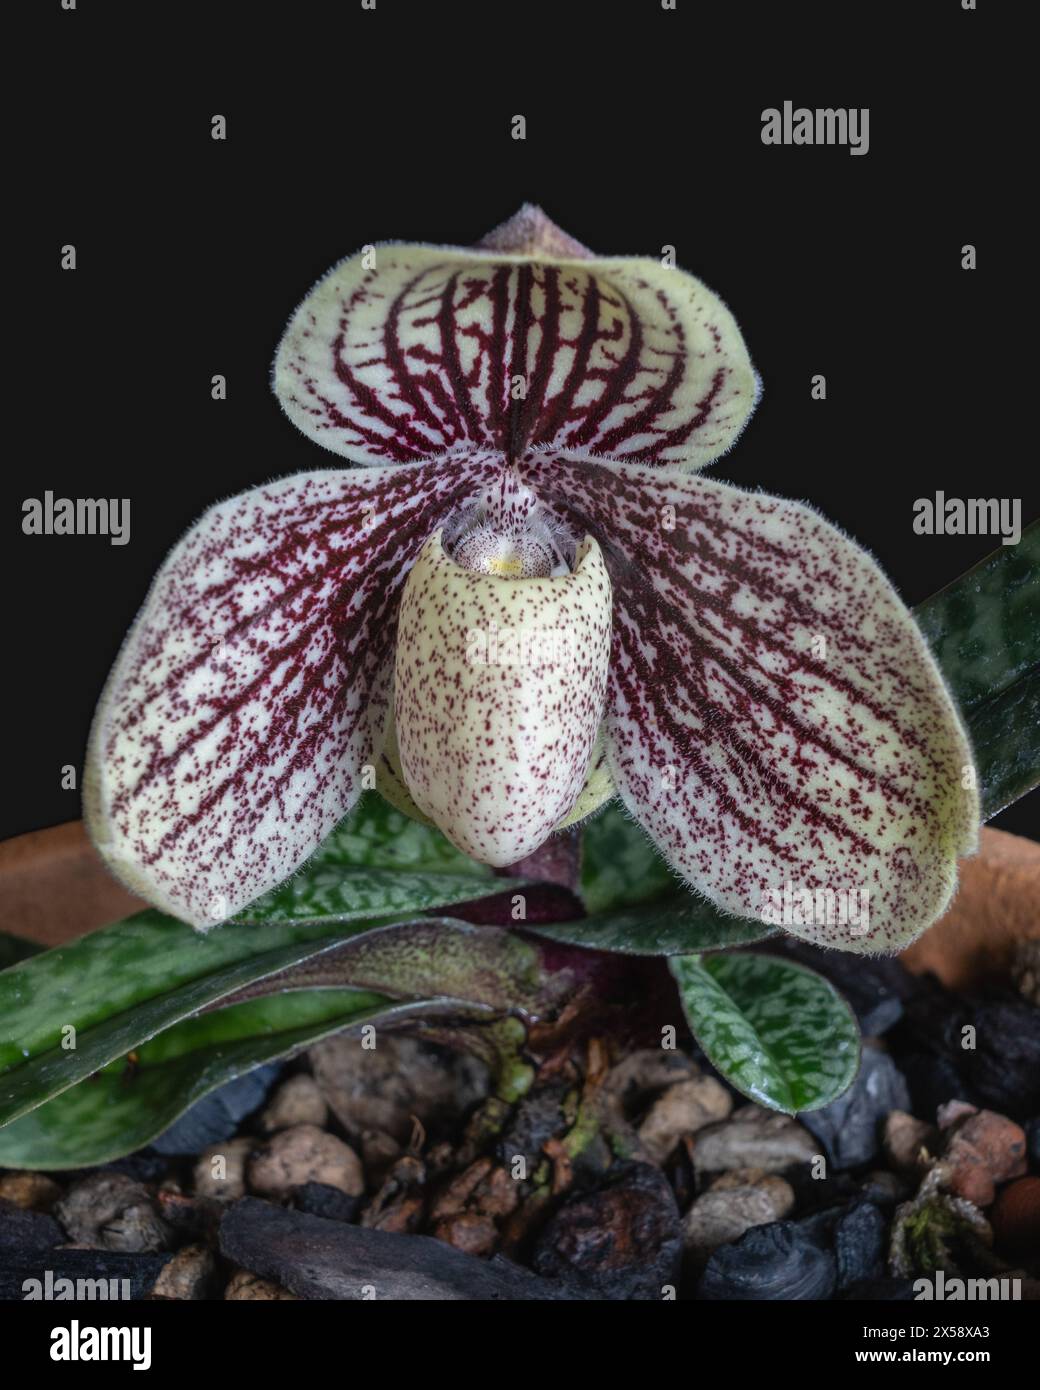 Closeup view of purple red and creamy white flower of potted lady slipper orchid species paphiopedilum myanmaricum isolated on black background Stock Photo